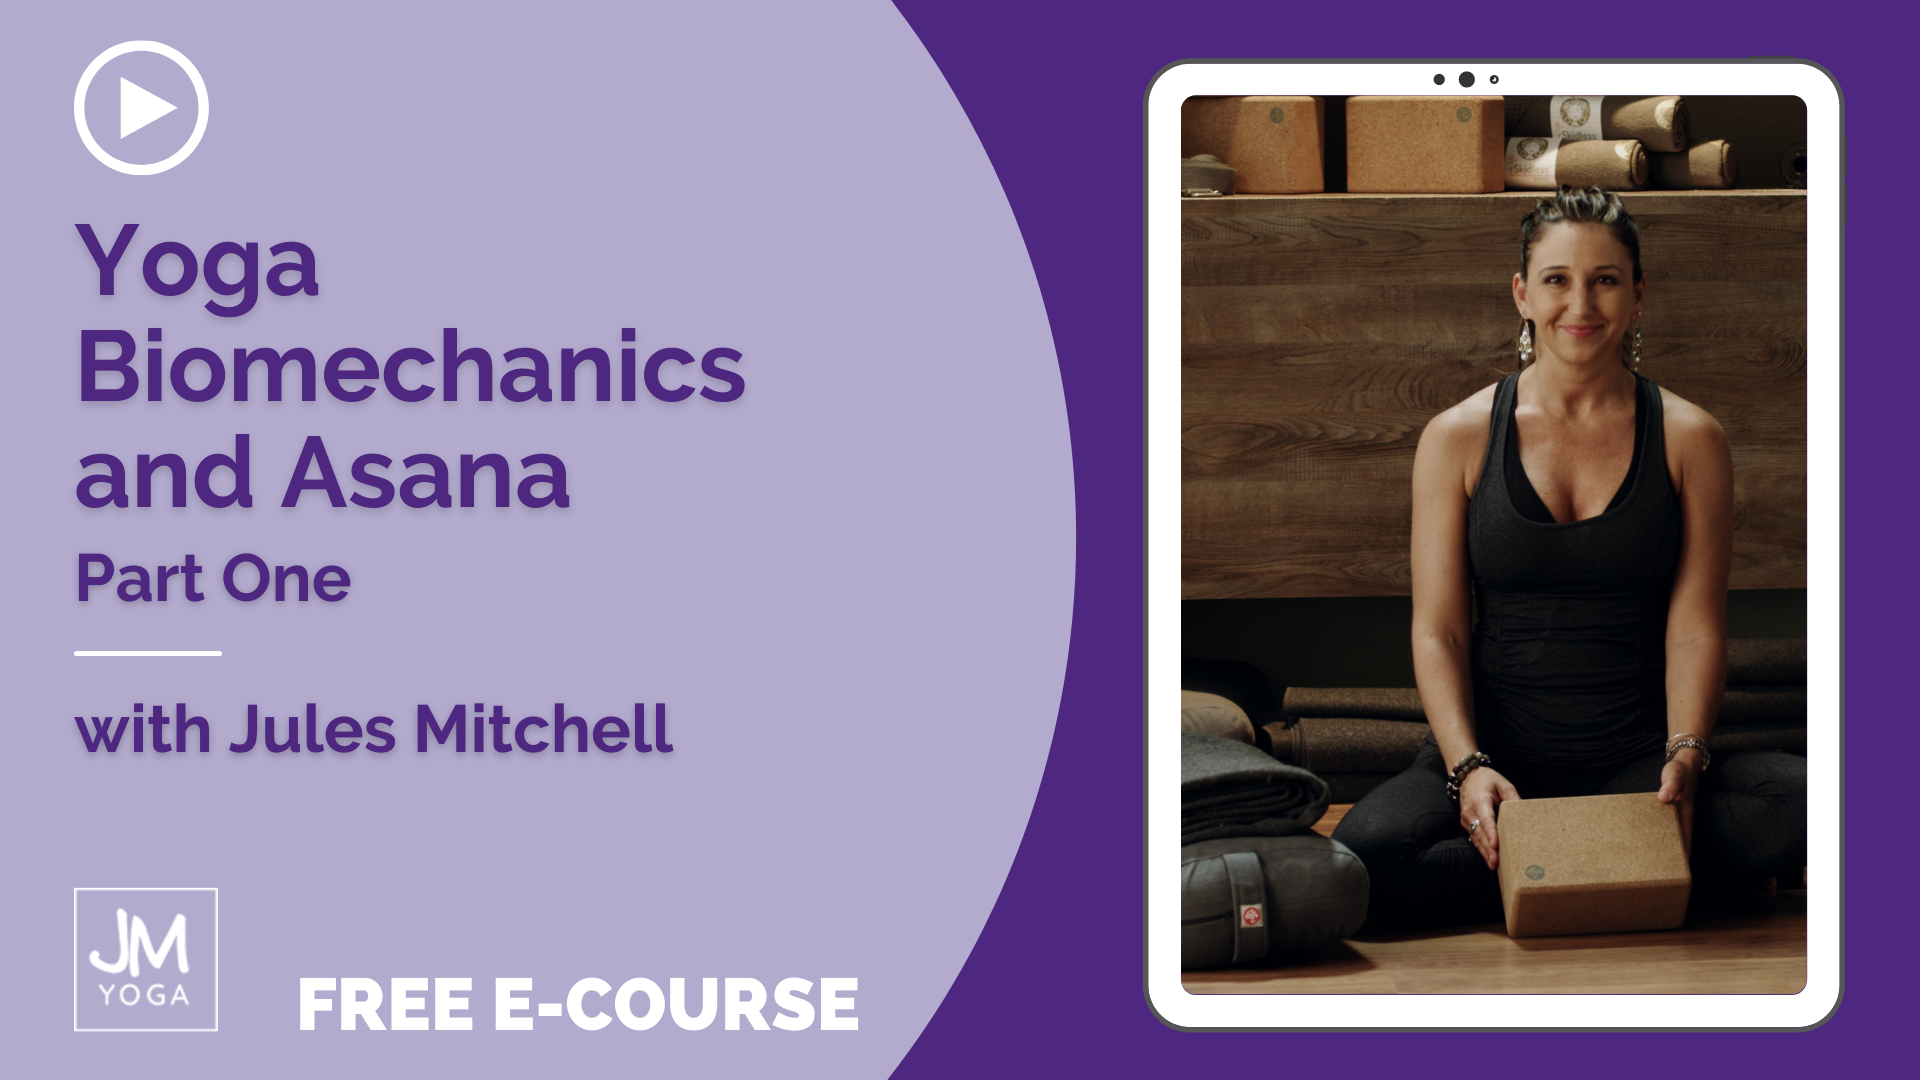 Product graphic in two shades of purple for Yoga Biomechanics and Asana Part One Free Ecourse with Jules Mitchell